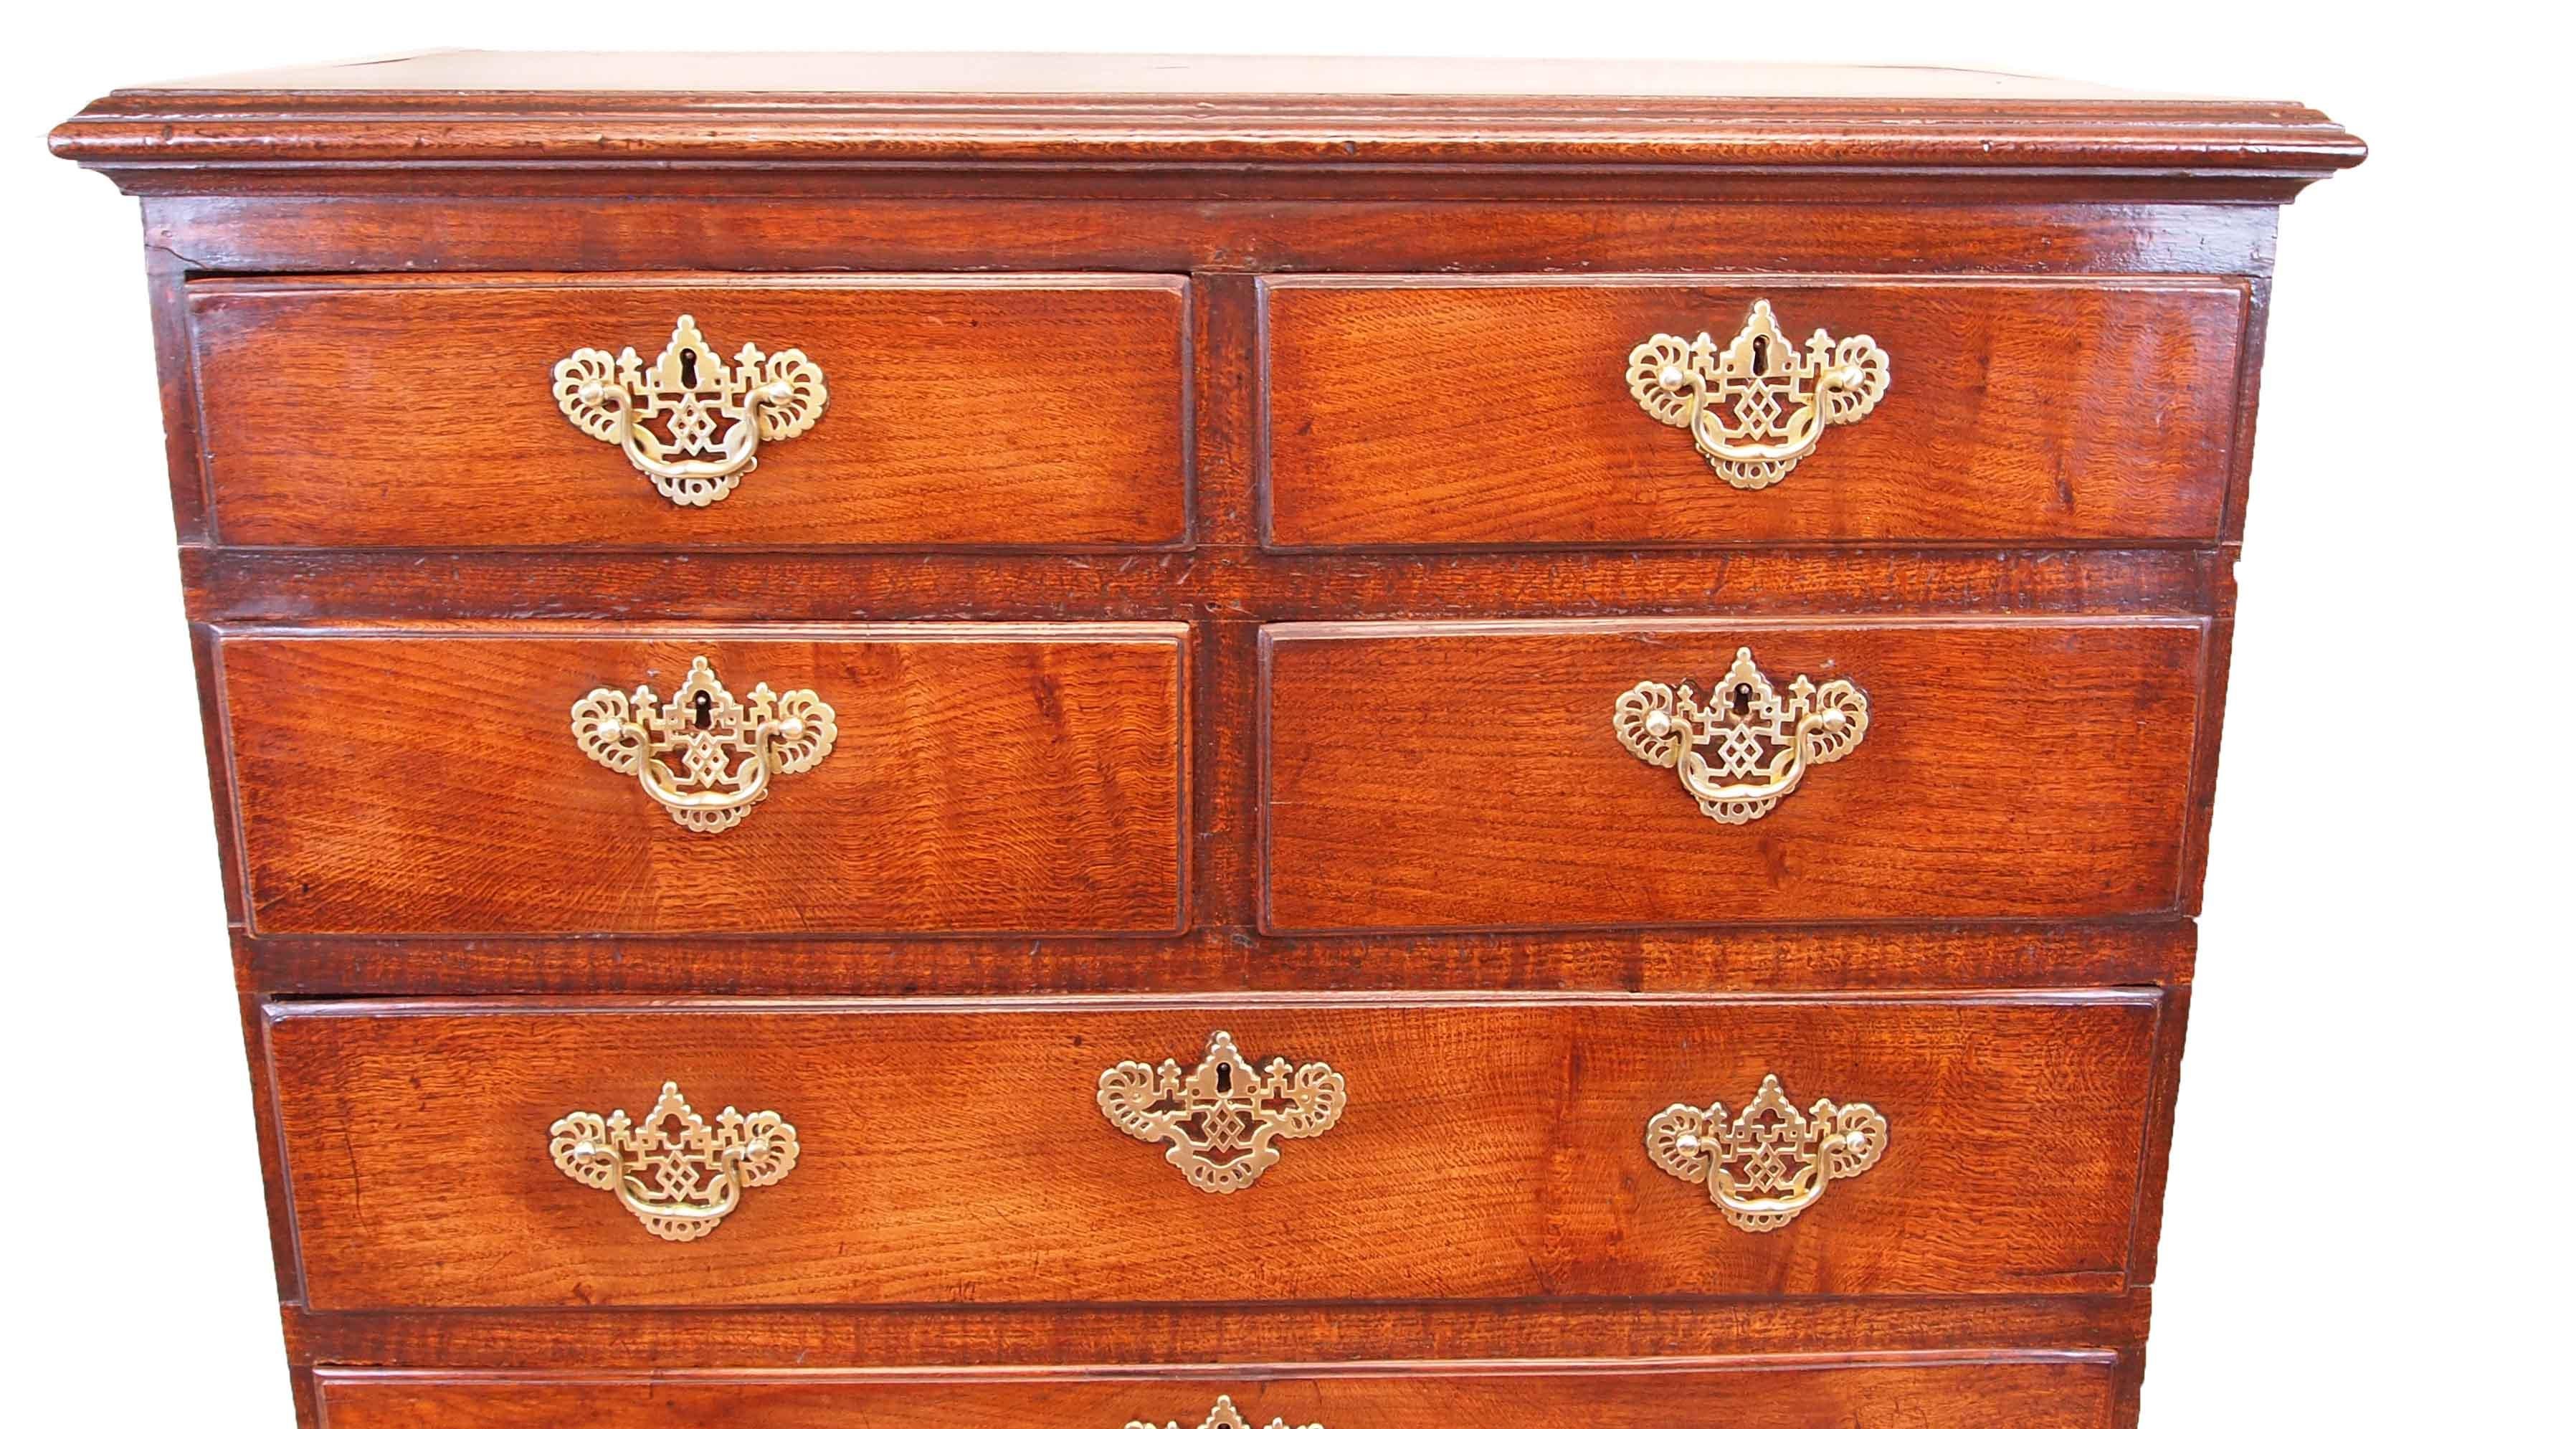 A delightful mid-18th century Georgian tall oak chest
of four short and four long drawers retaining exceptional
rich color and patina throughout and original brasswear
raised on original shaped bracket feet

(This is one of the most simple, but